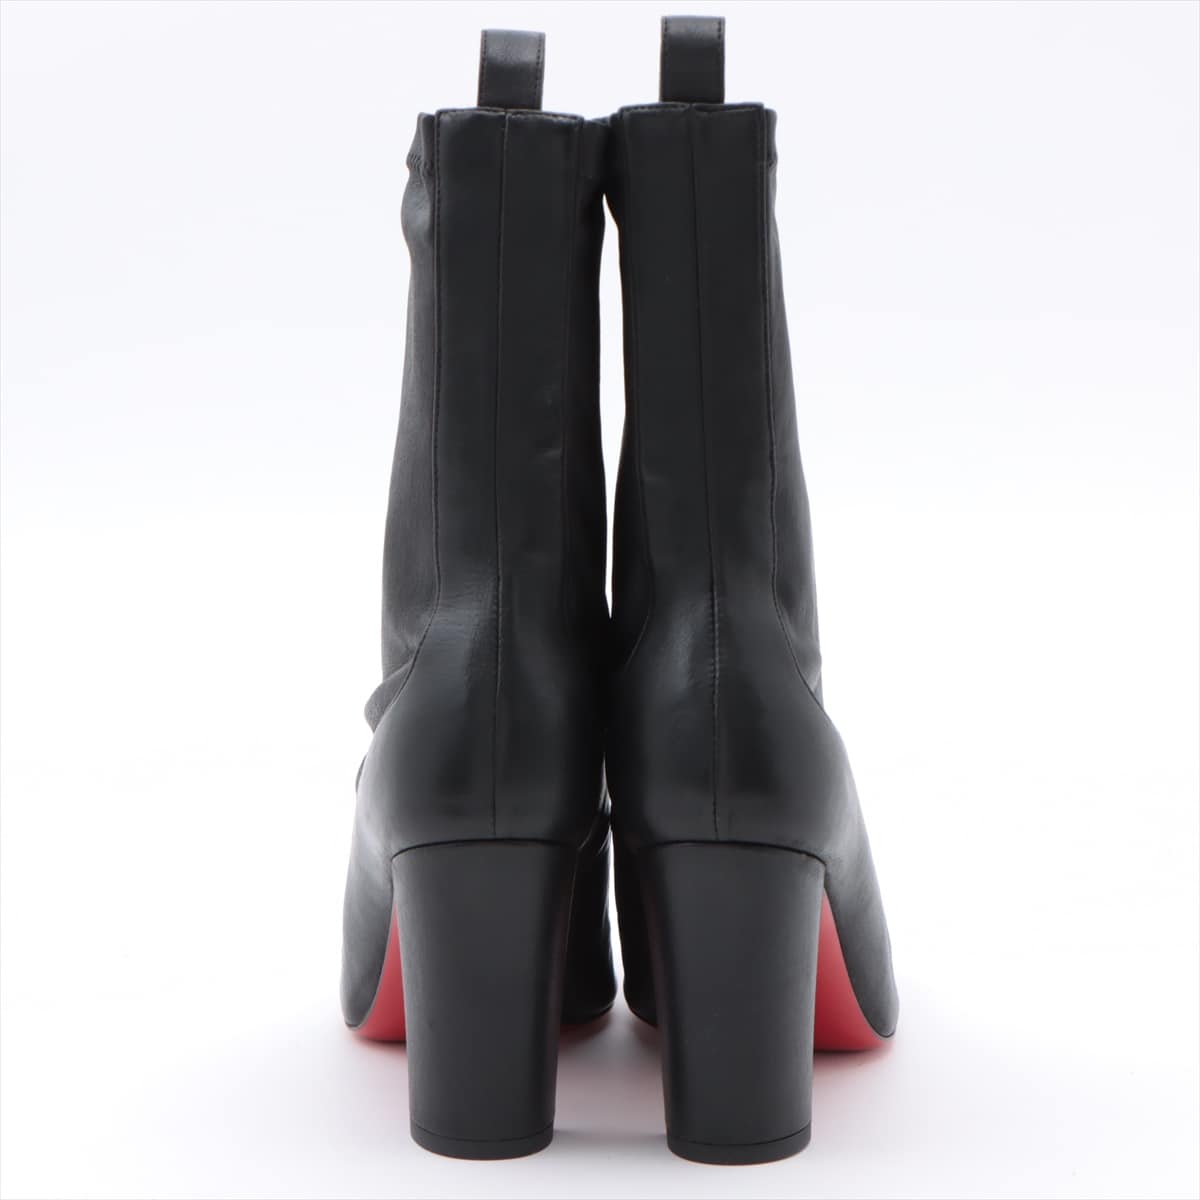 Christian Louboutin Leather Boots 36 1/2 Ladies' Black